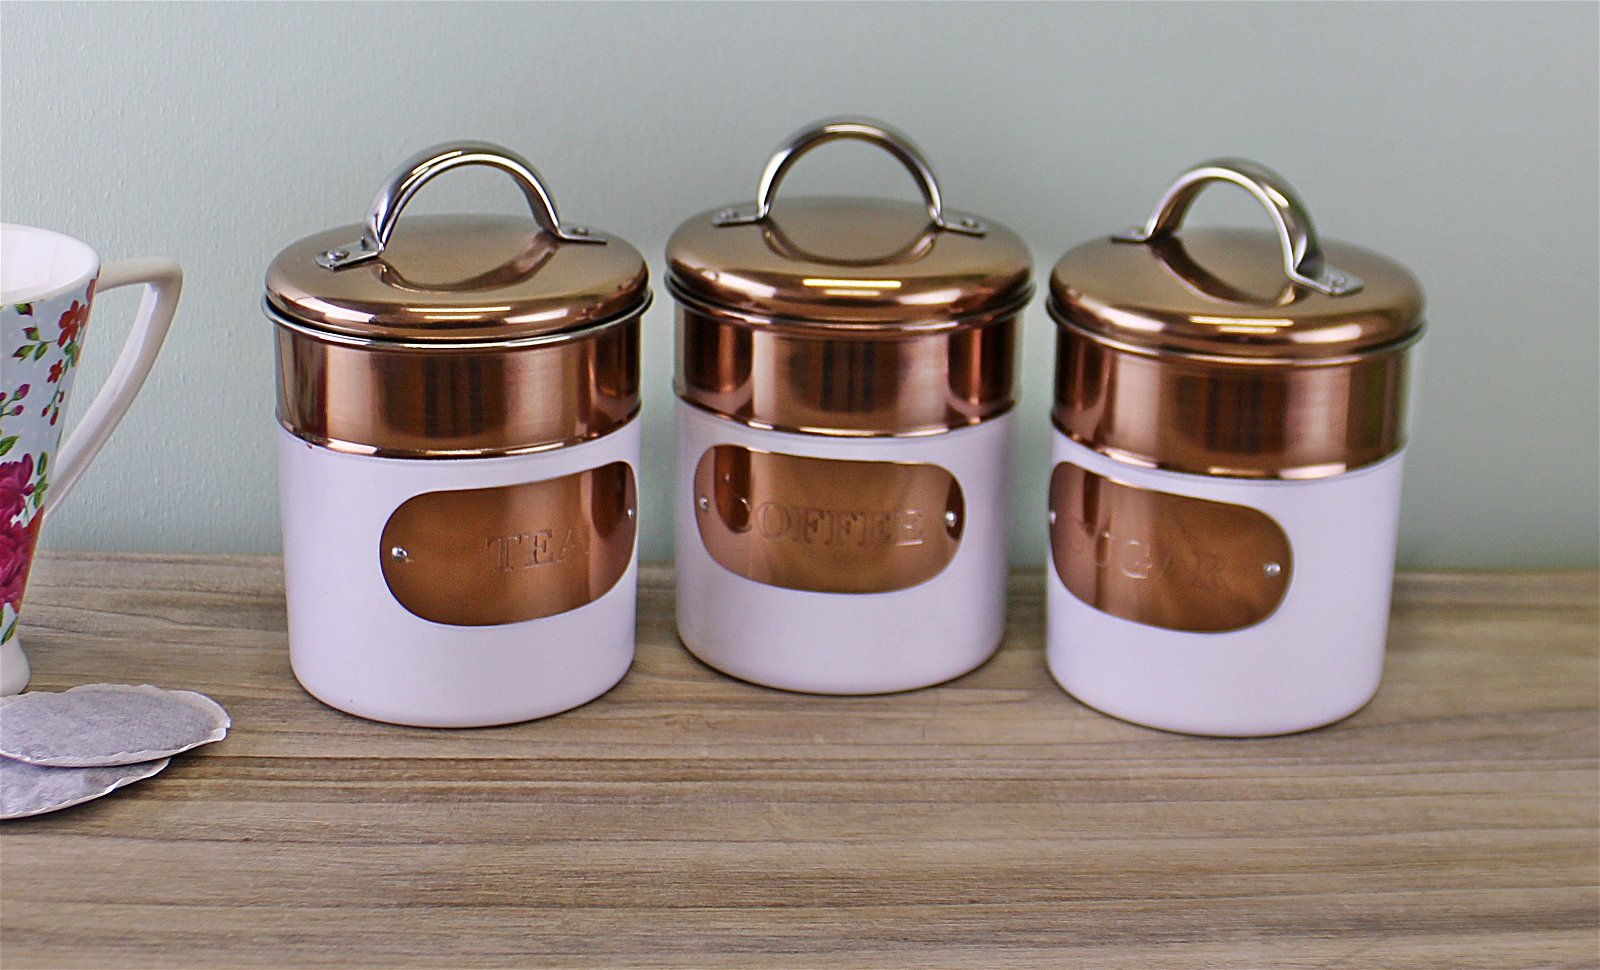 Set of 3 Tea,Coffee & Sugar Canisters, Copper & White Metal Design